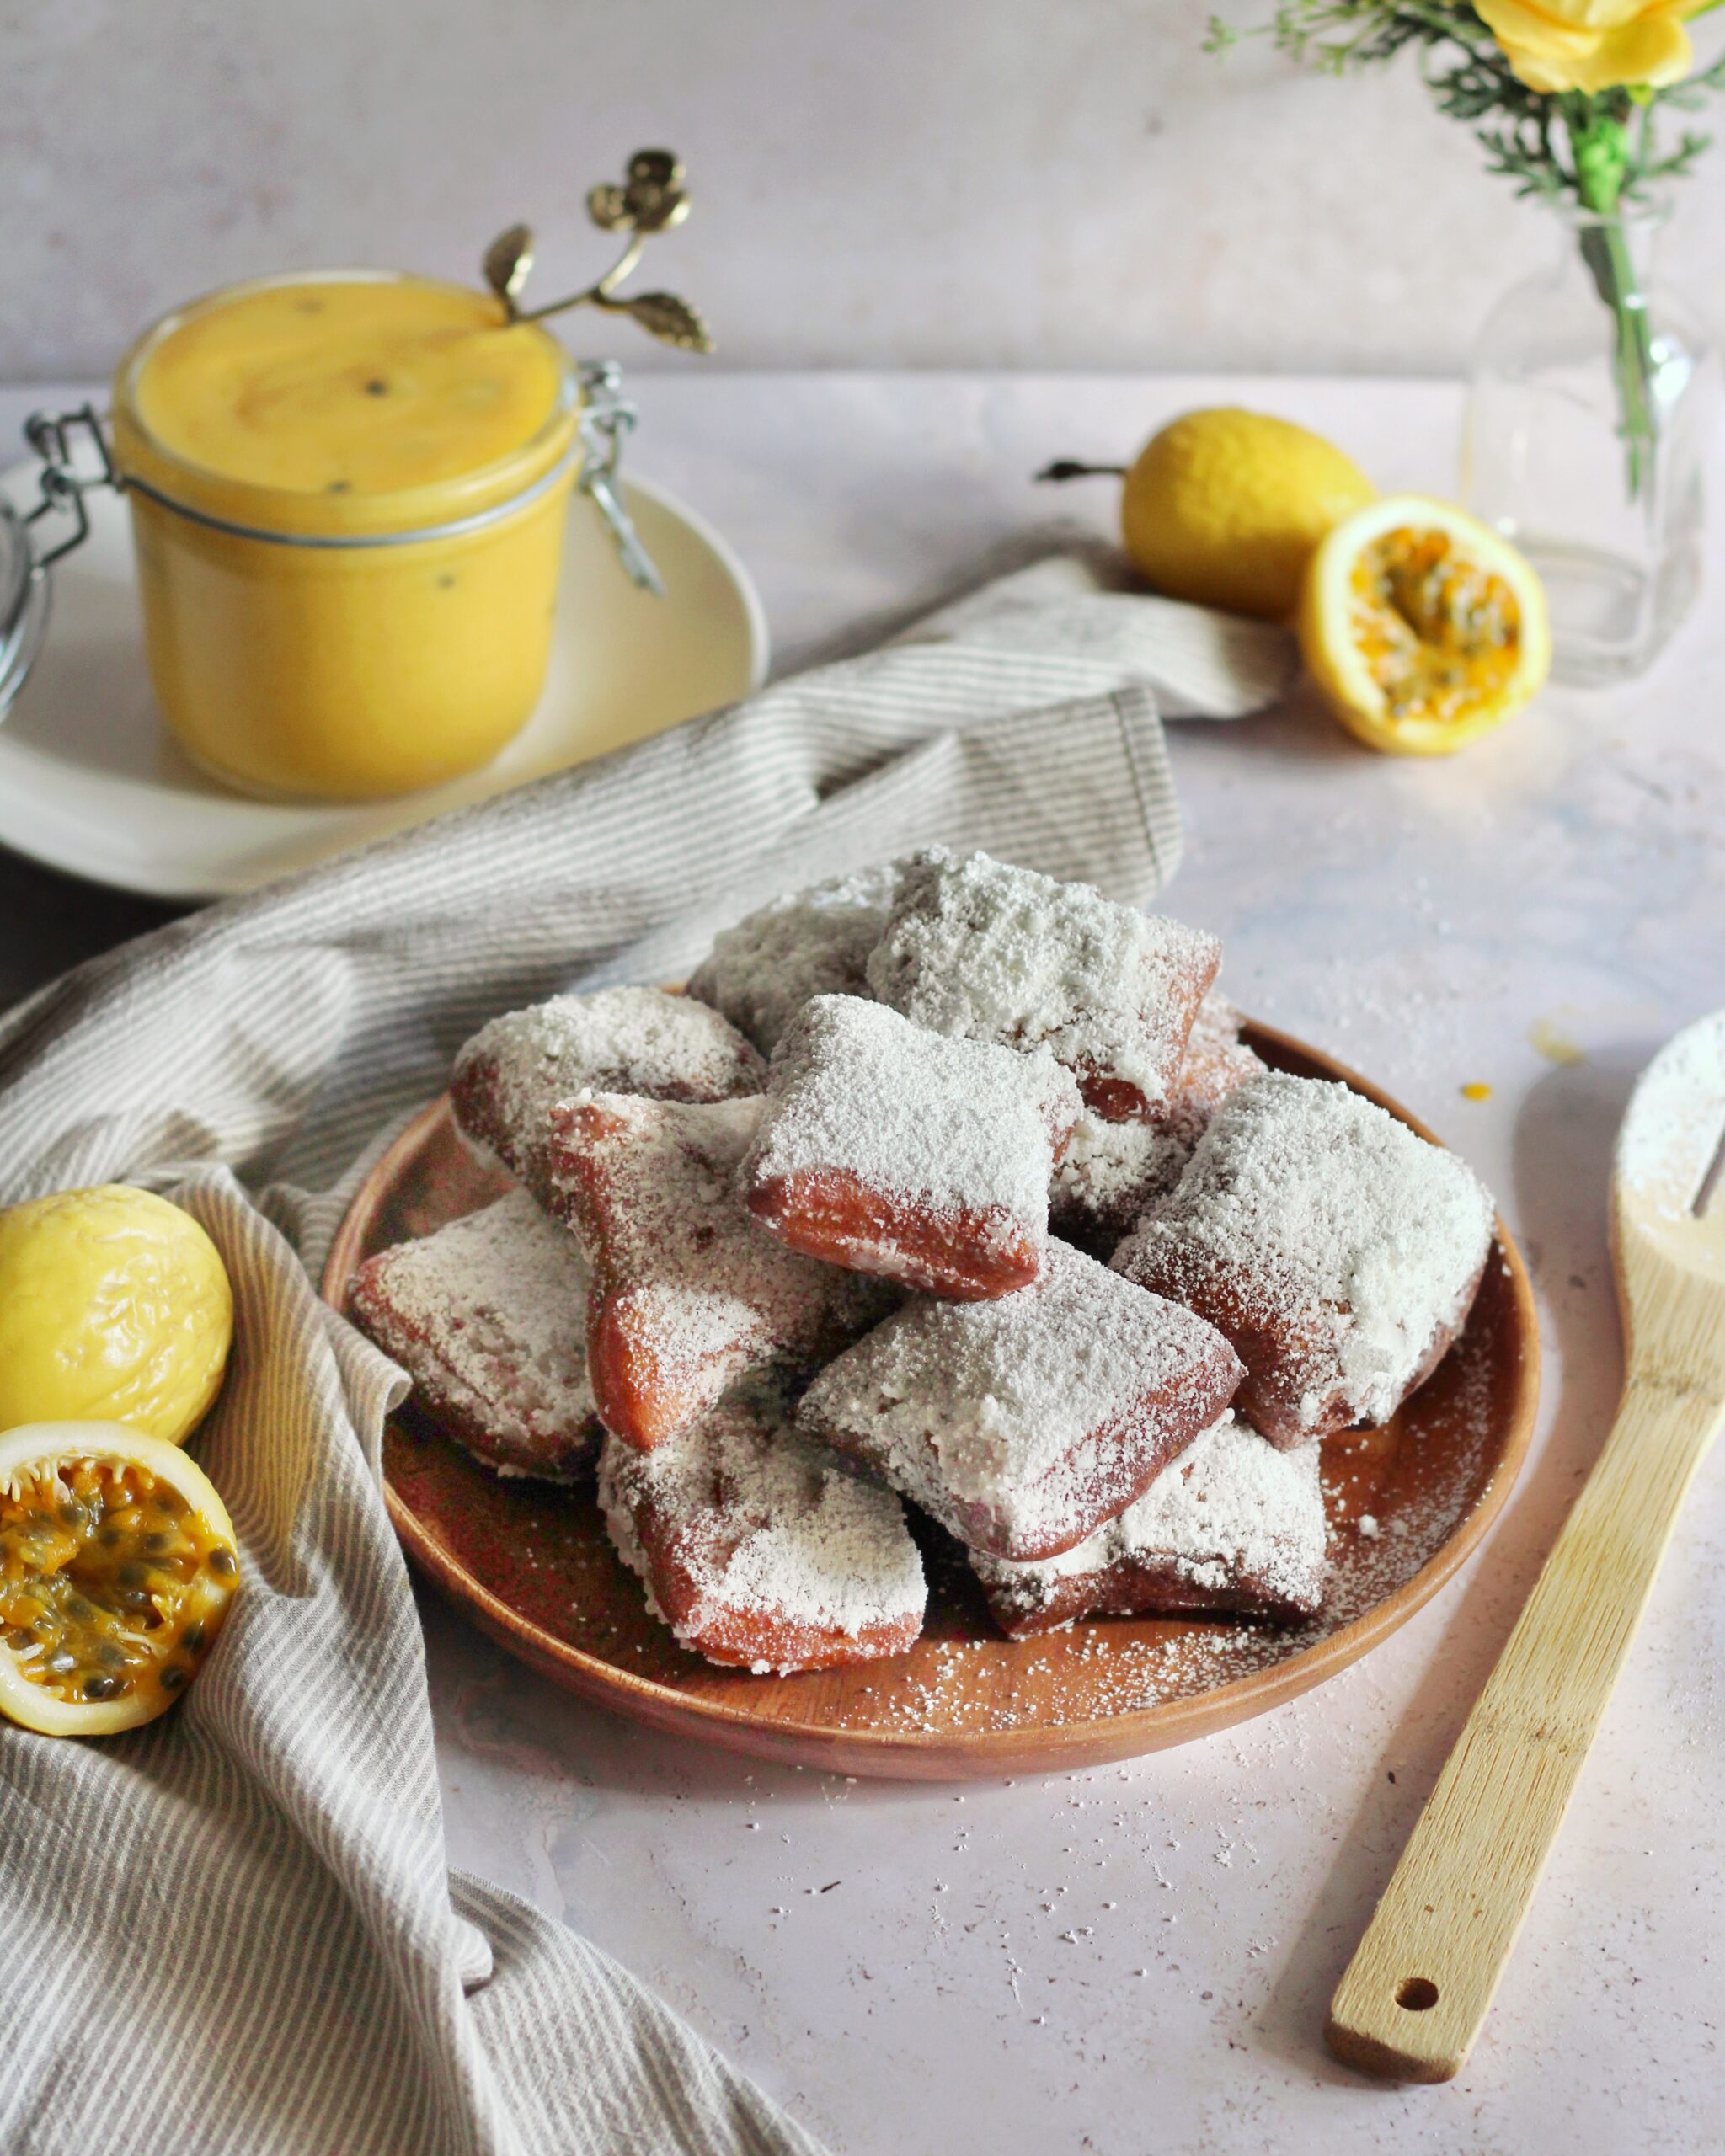 Plate of beignets with powdered sugar